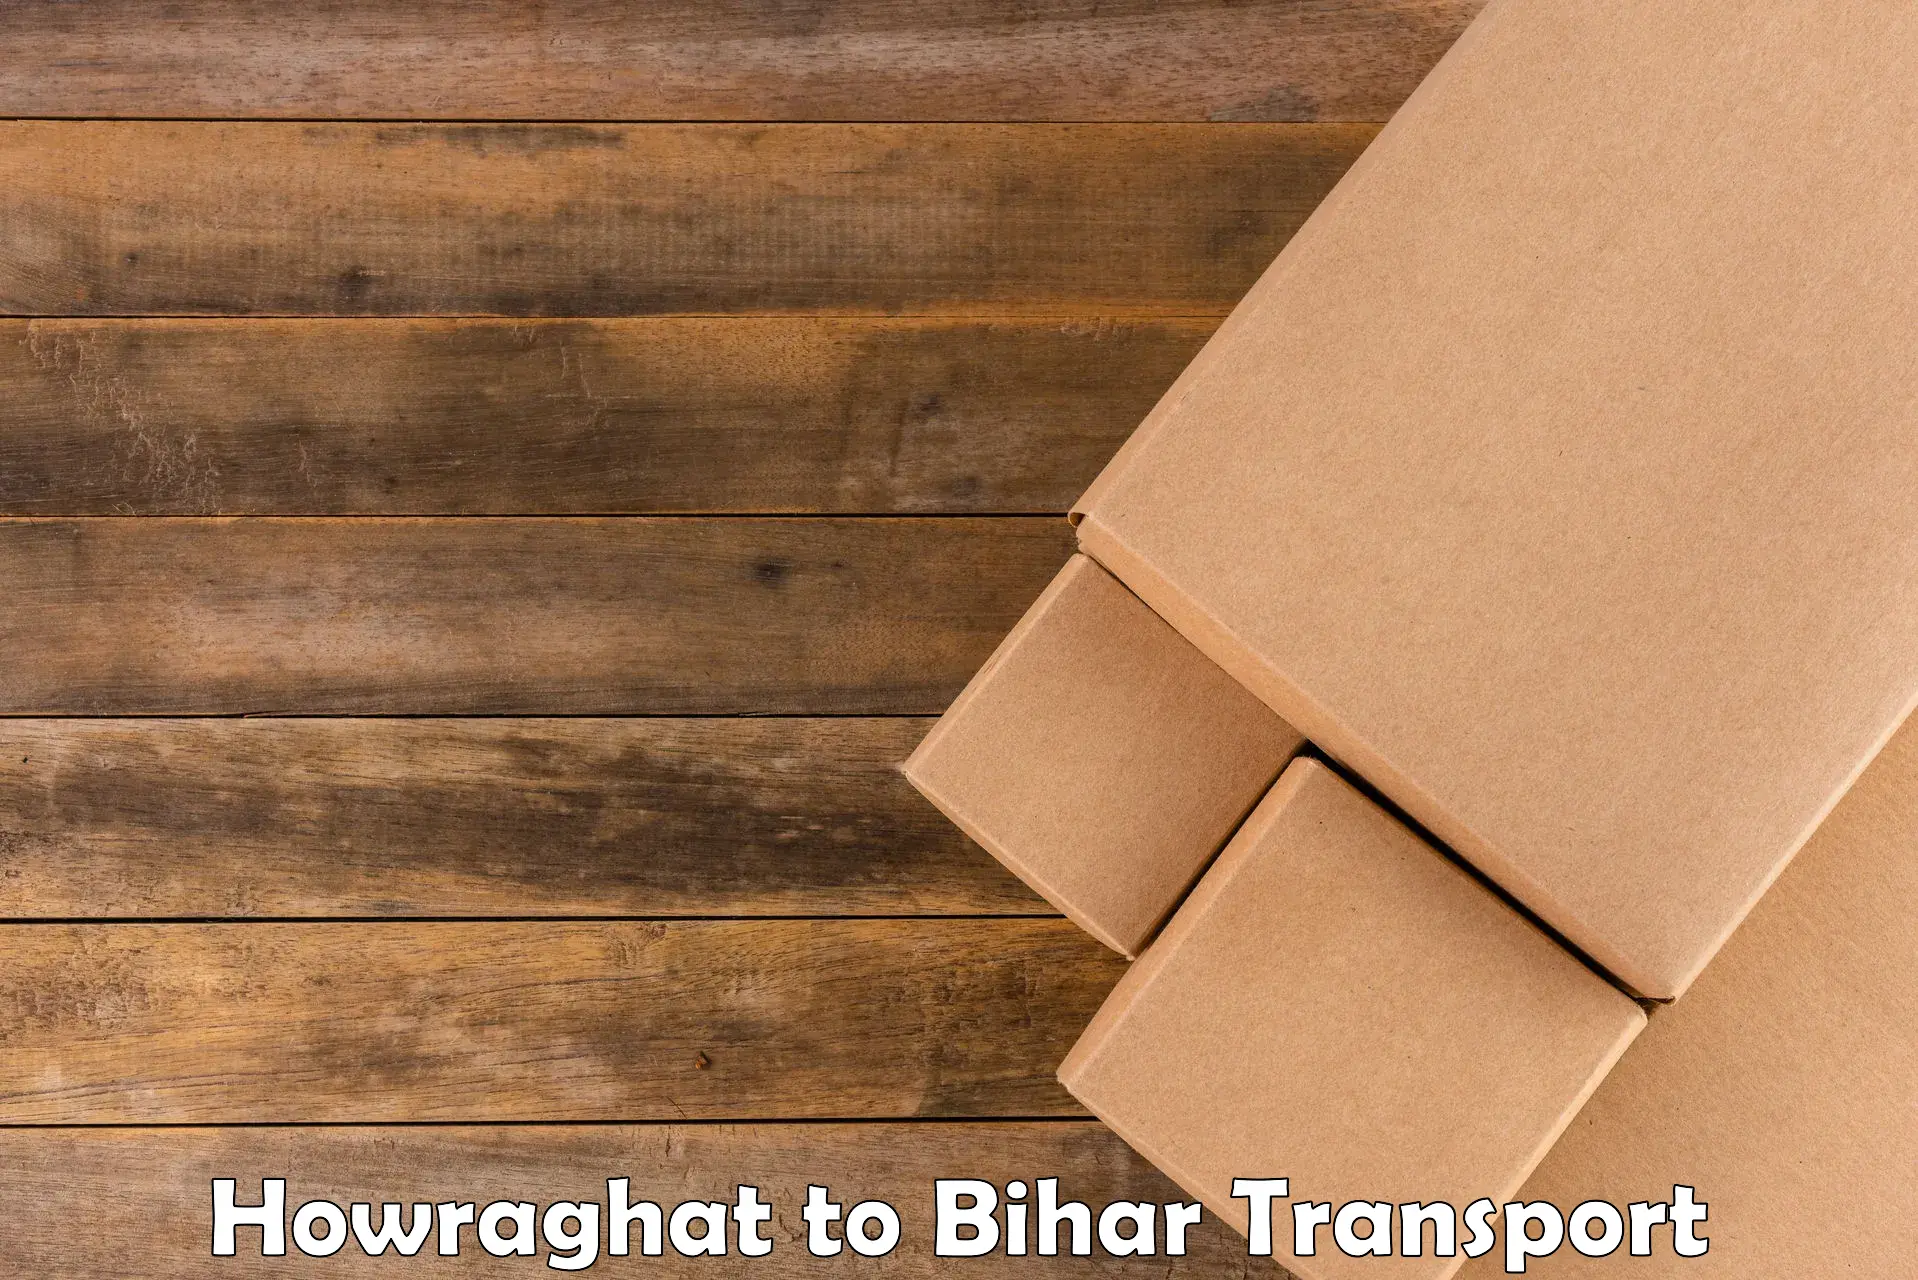 Air freight transport services in Howraghat to Sultanganj